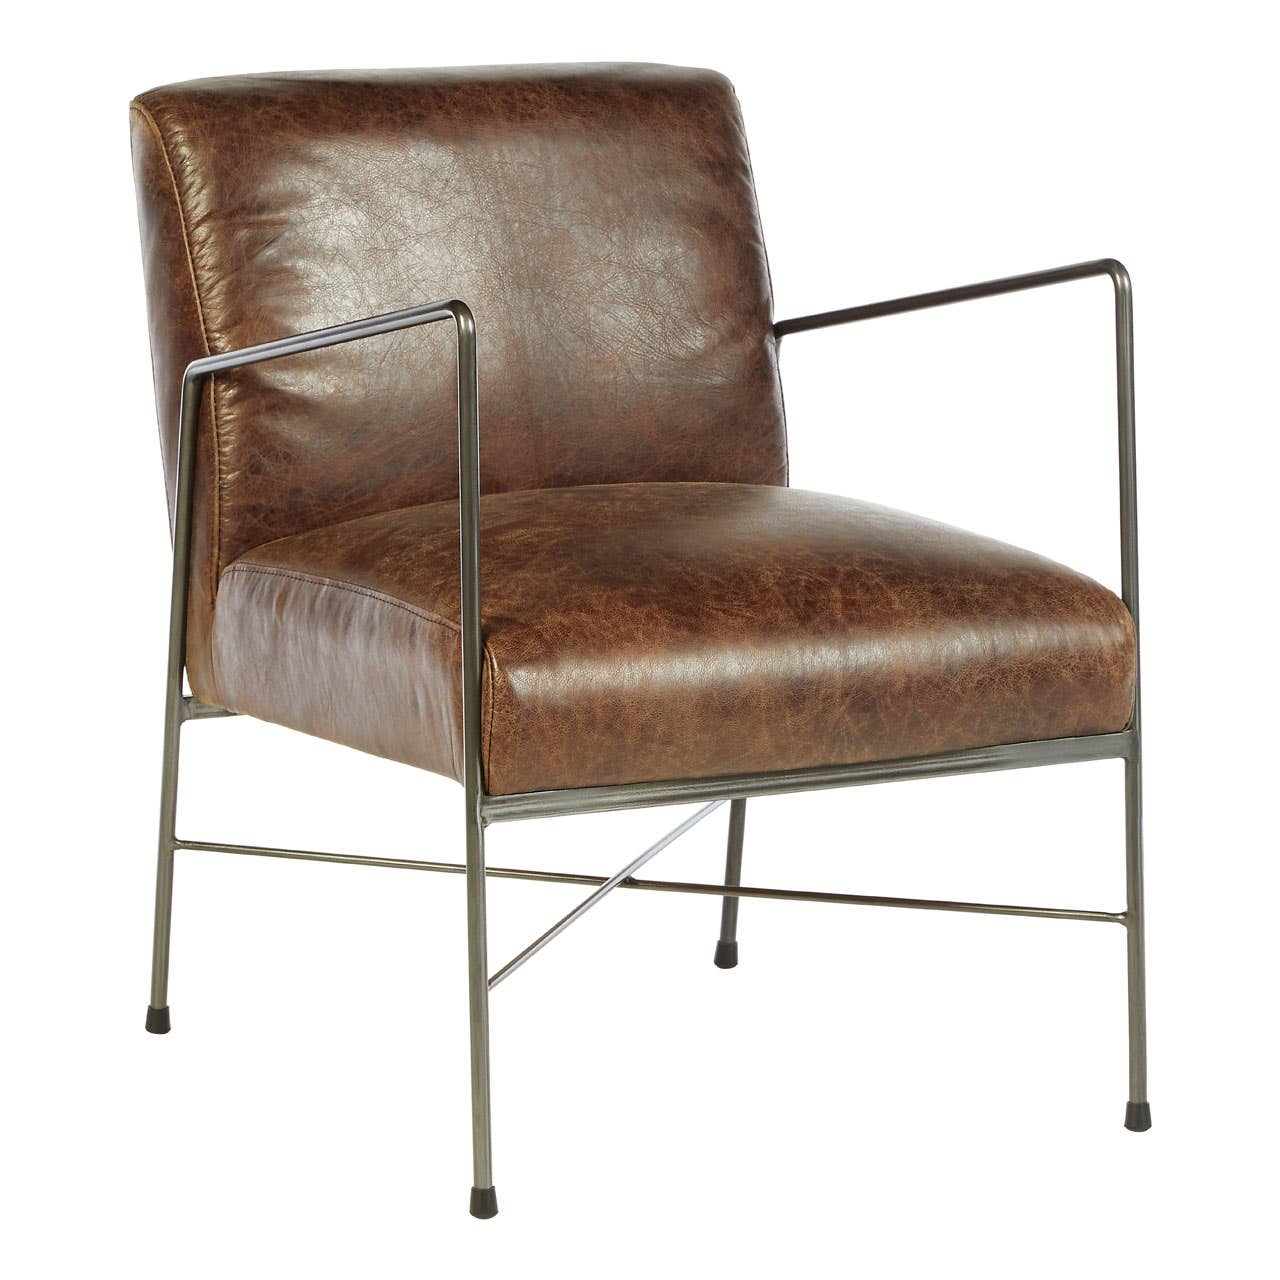 Hoxton Leather Dining Chair